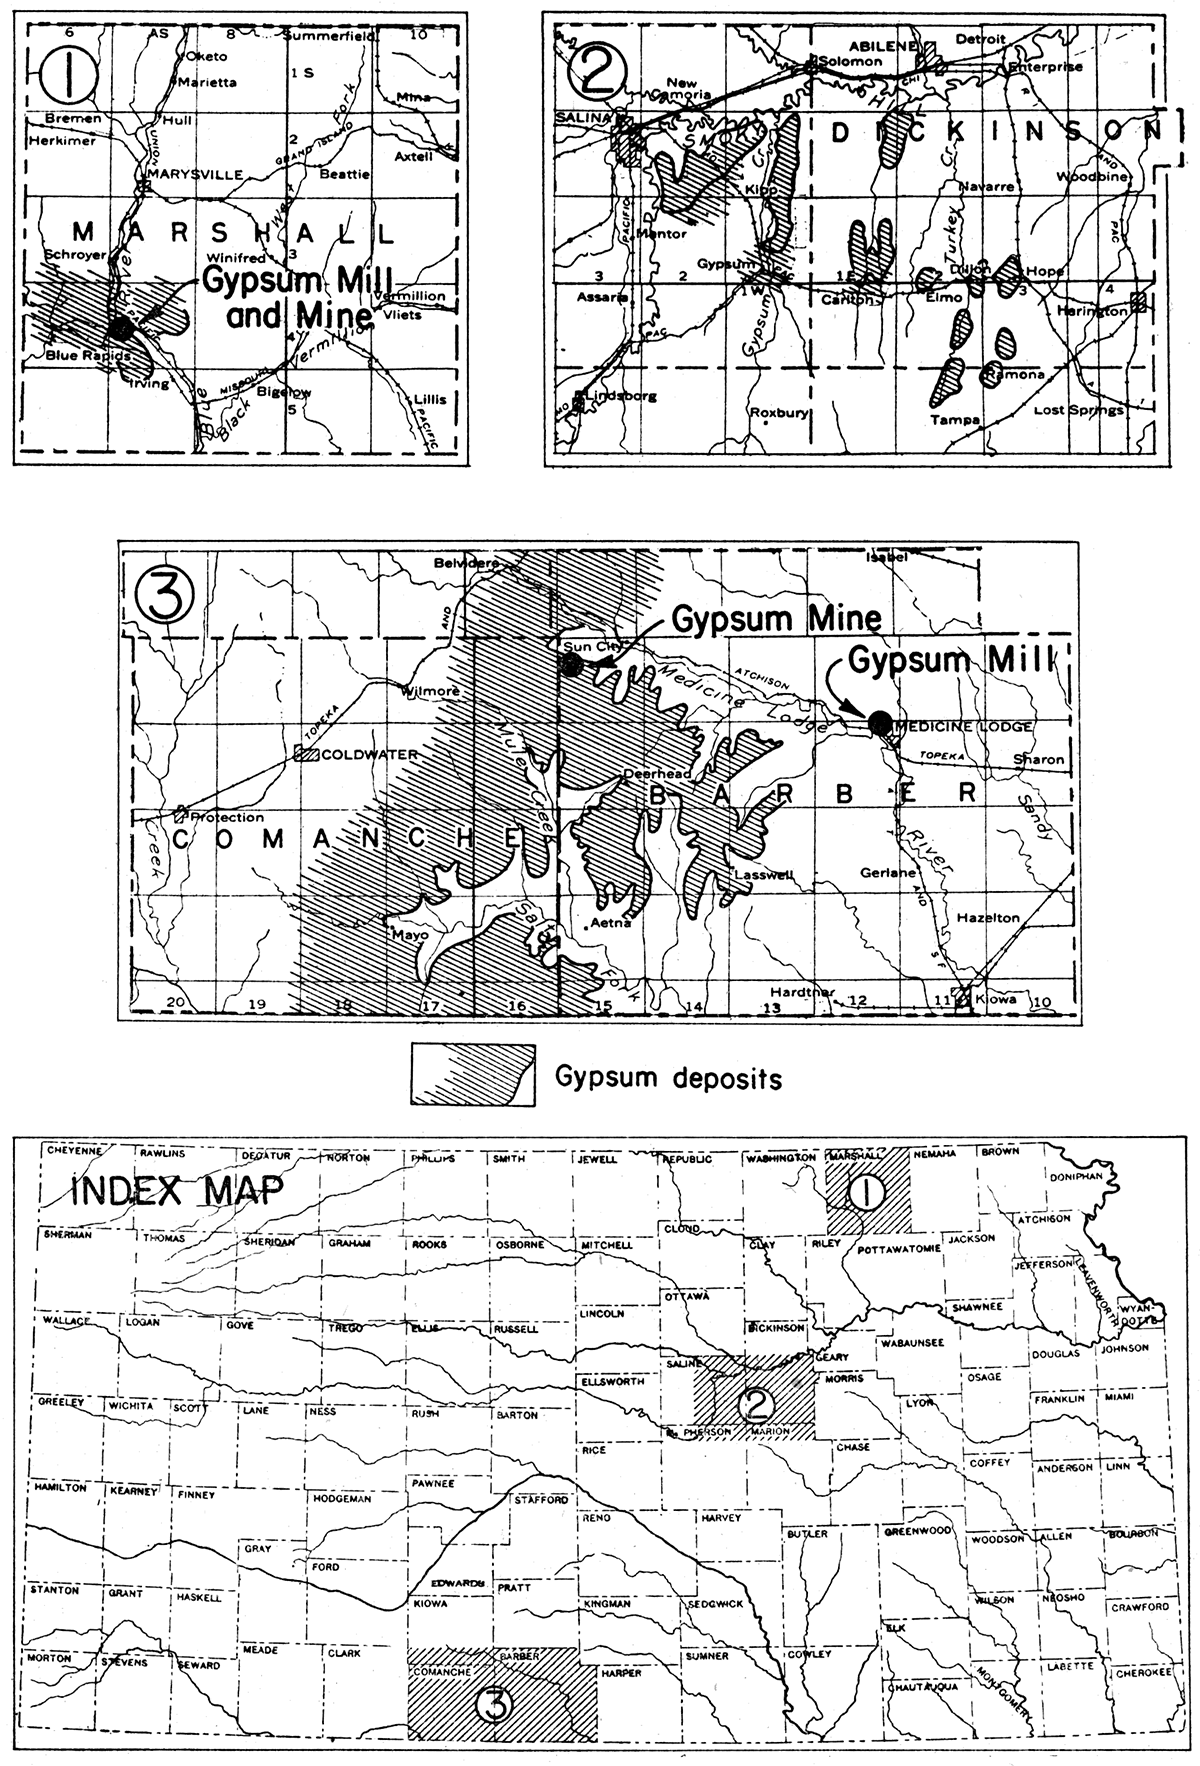 Index and detail maps showing distribution of three areas of Permian gypsum deposits, and location of gypsum mills and mines.